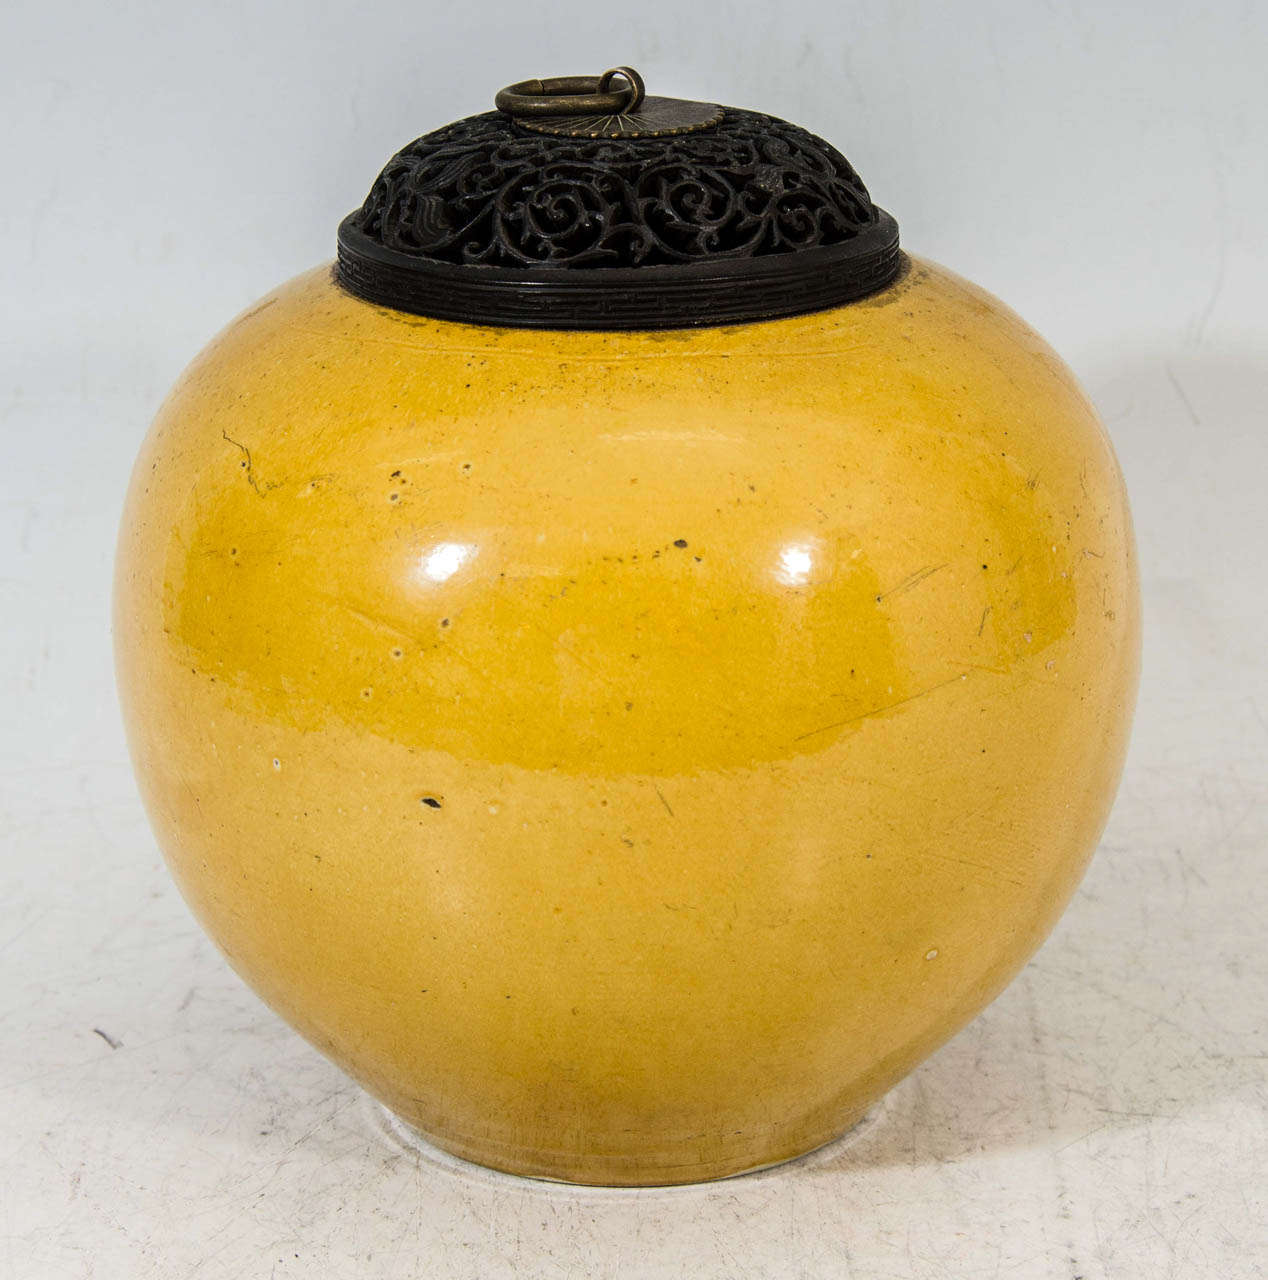 A late 17th or early 18th century Kangxi porcelain tea jar enameled over the sides and base with Imperial Yellow enamel.  The jar has a carved hardwood piecework domed cover with a bronze ring handle

Good condition with age appropriate wear to